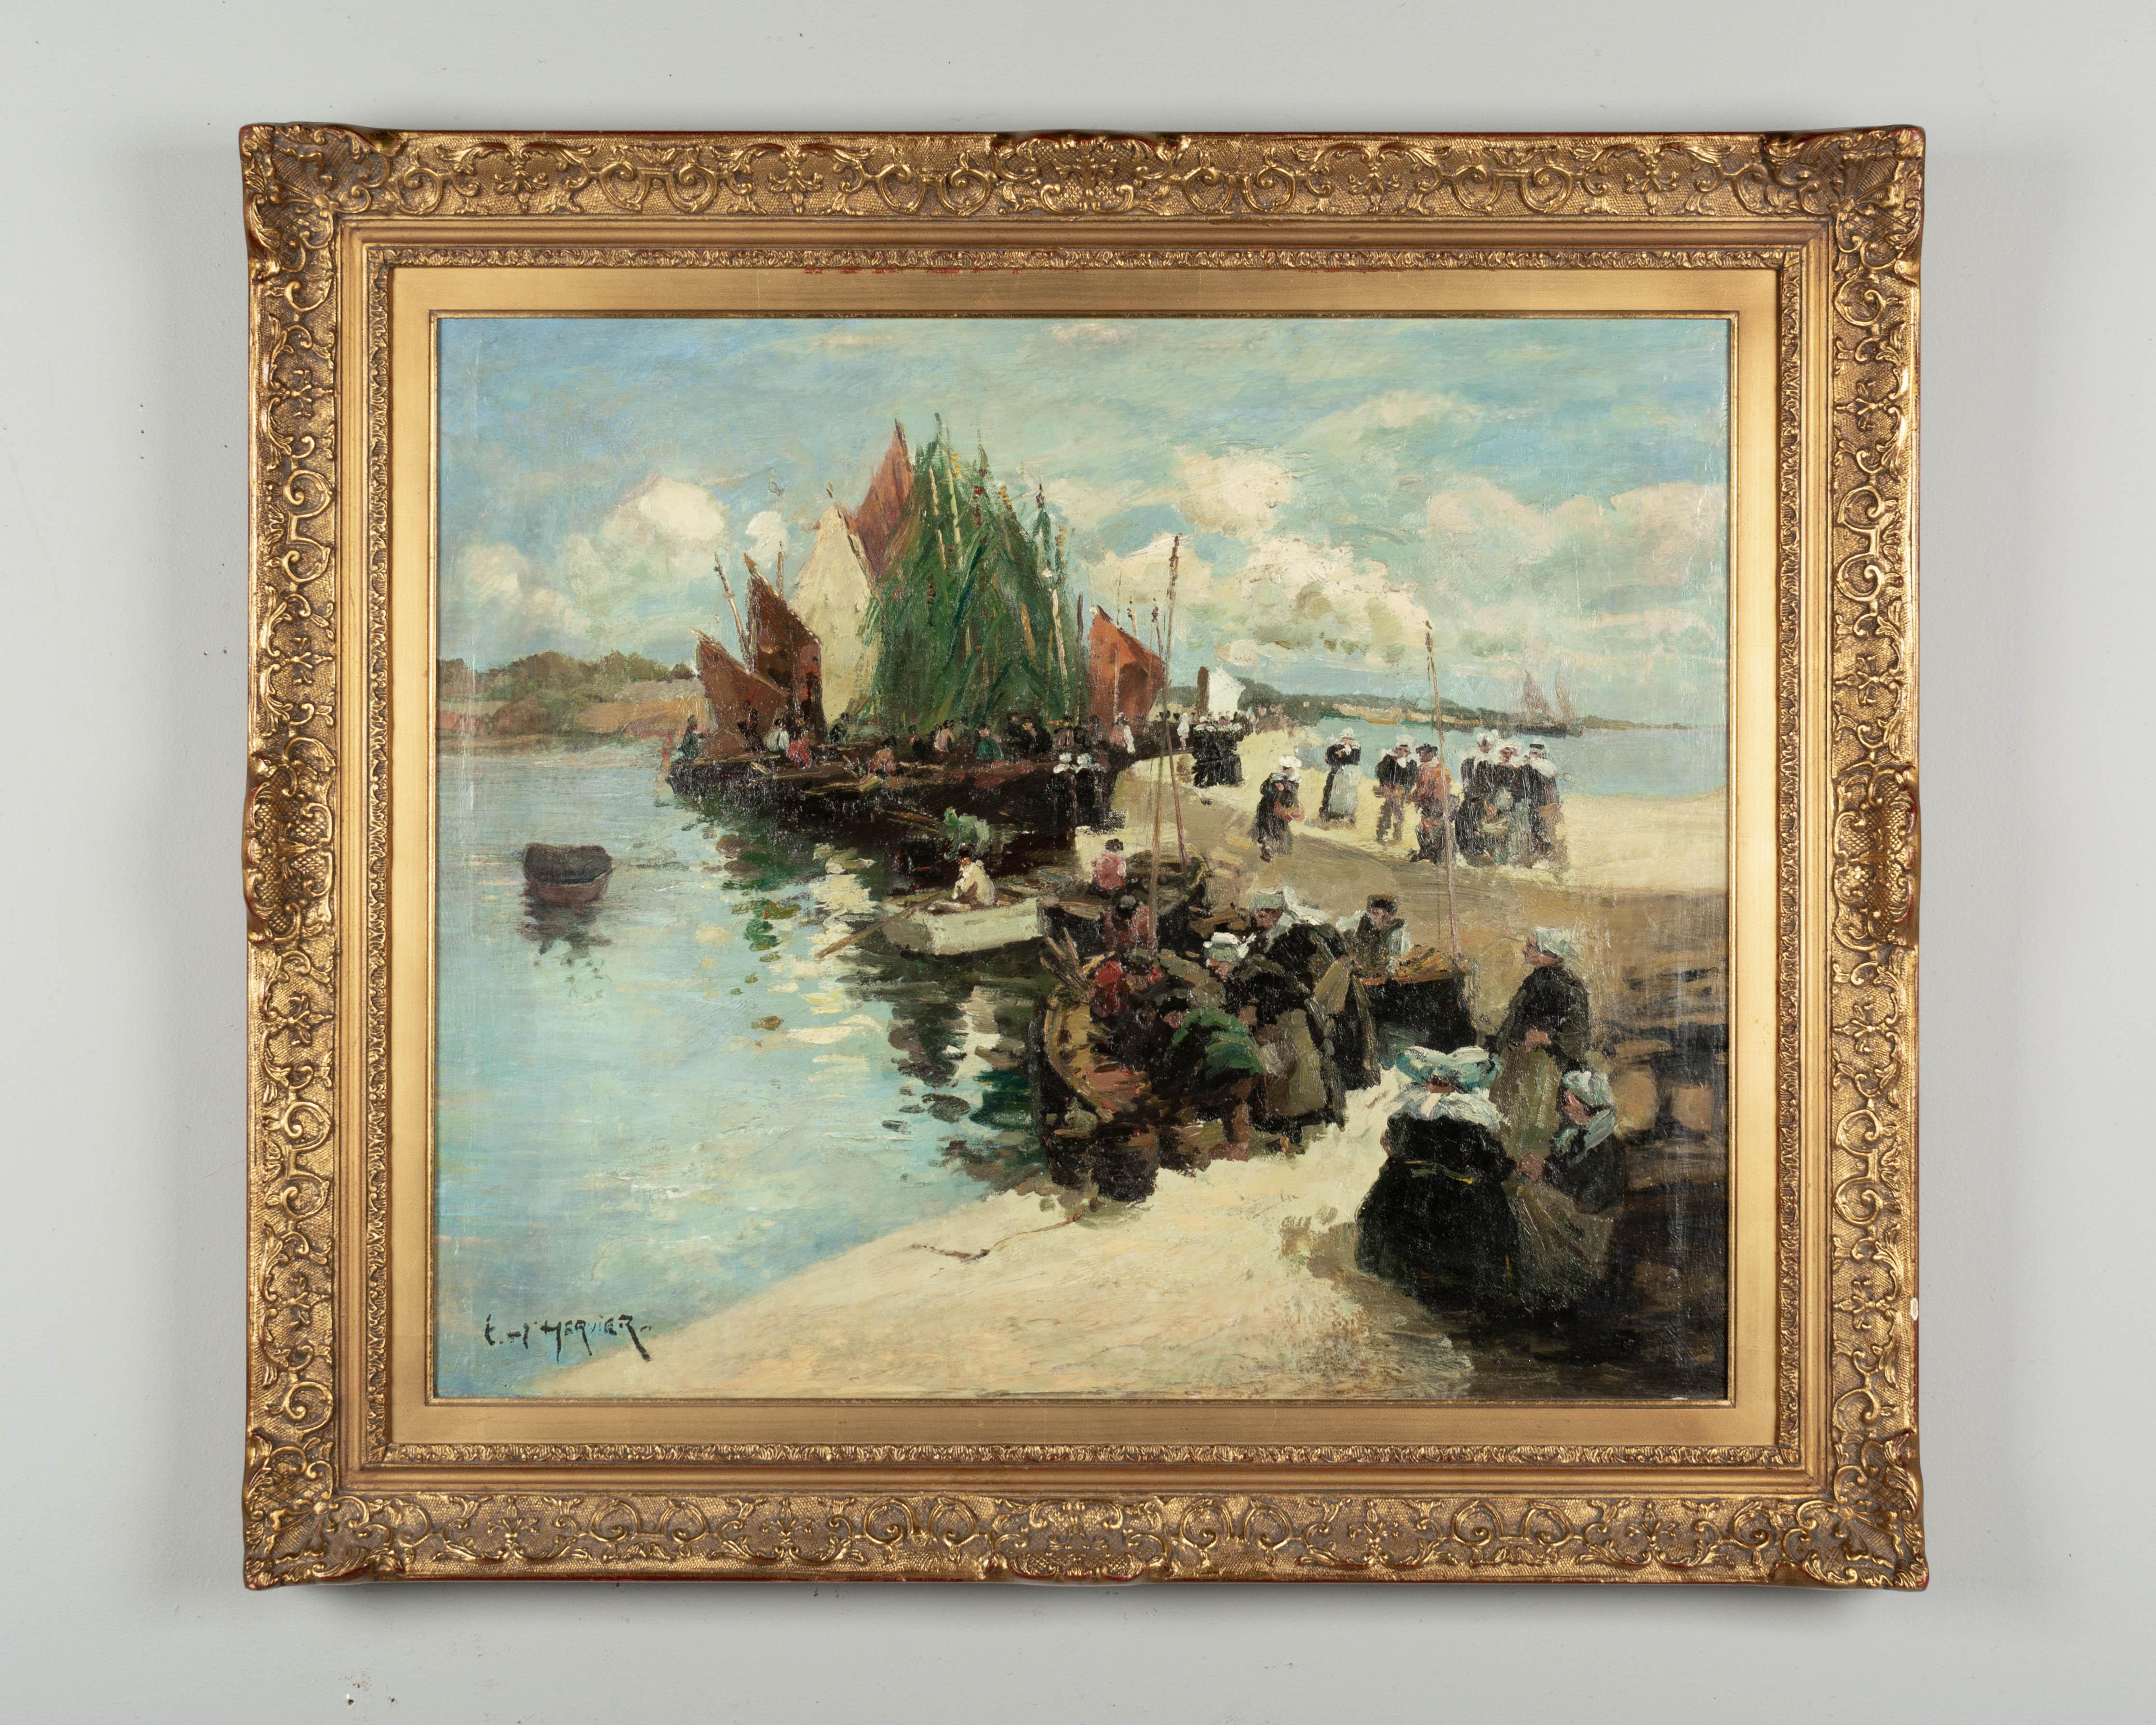 A French painting depicting a Normandy fisherman's wharf with boats in the background and women in traditional dress on the dock in the foreground, helping to bring in the catch. Oil on canvas, painted in an Impressionist style with thick impasto